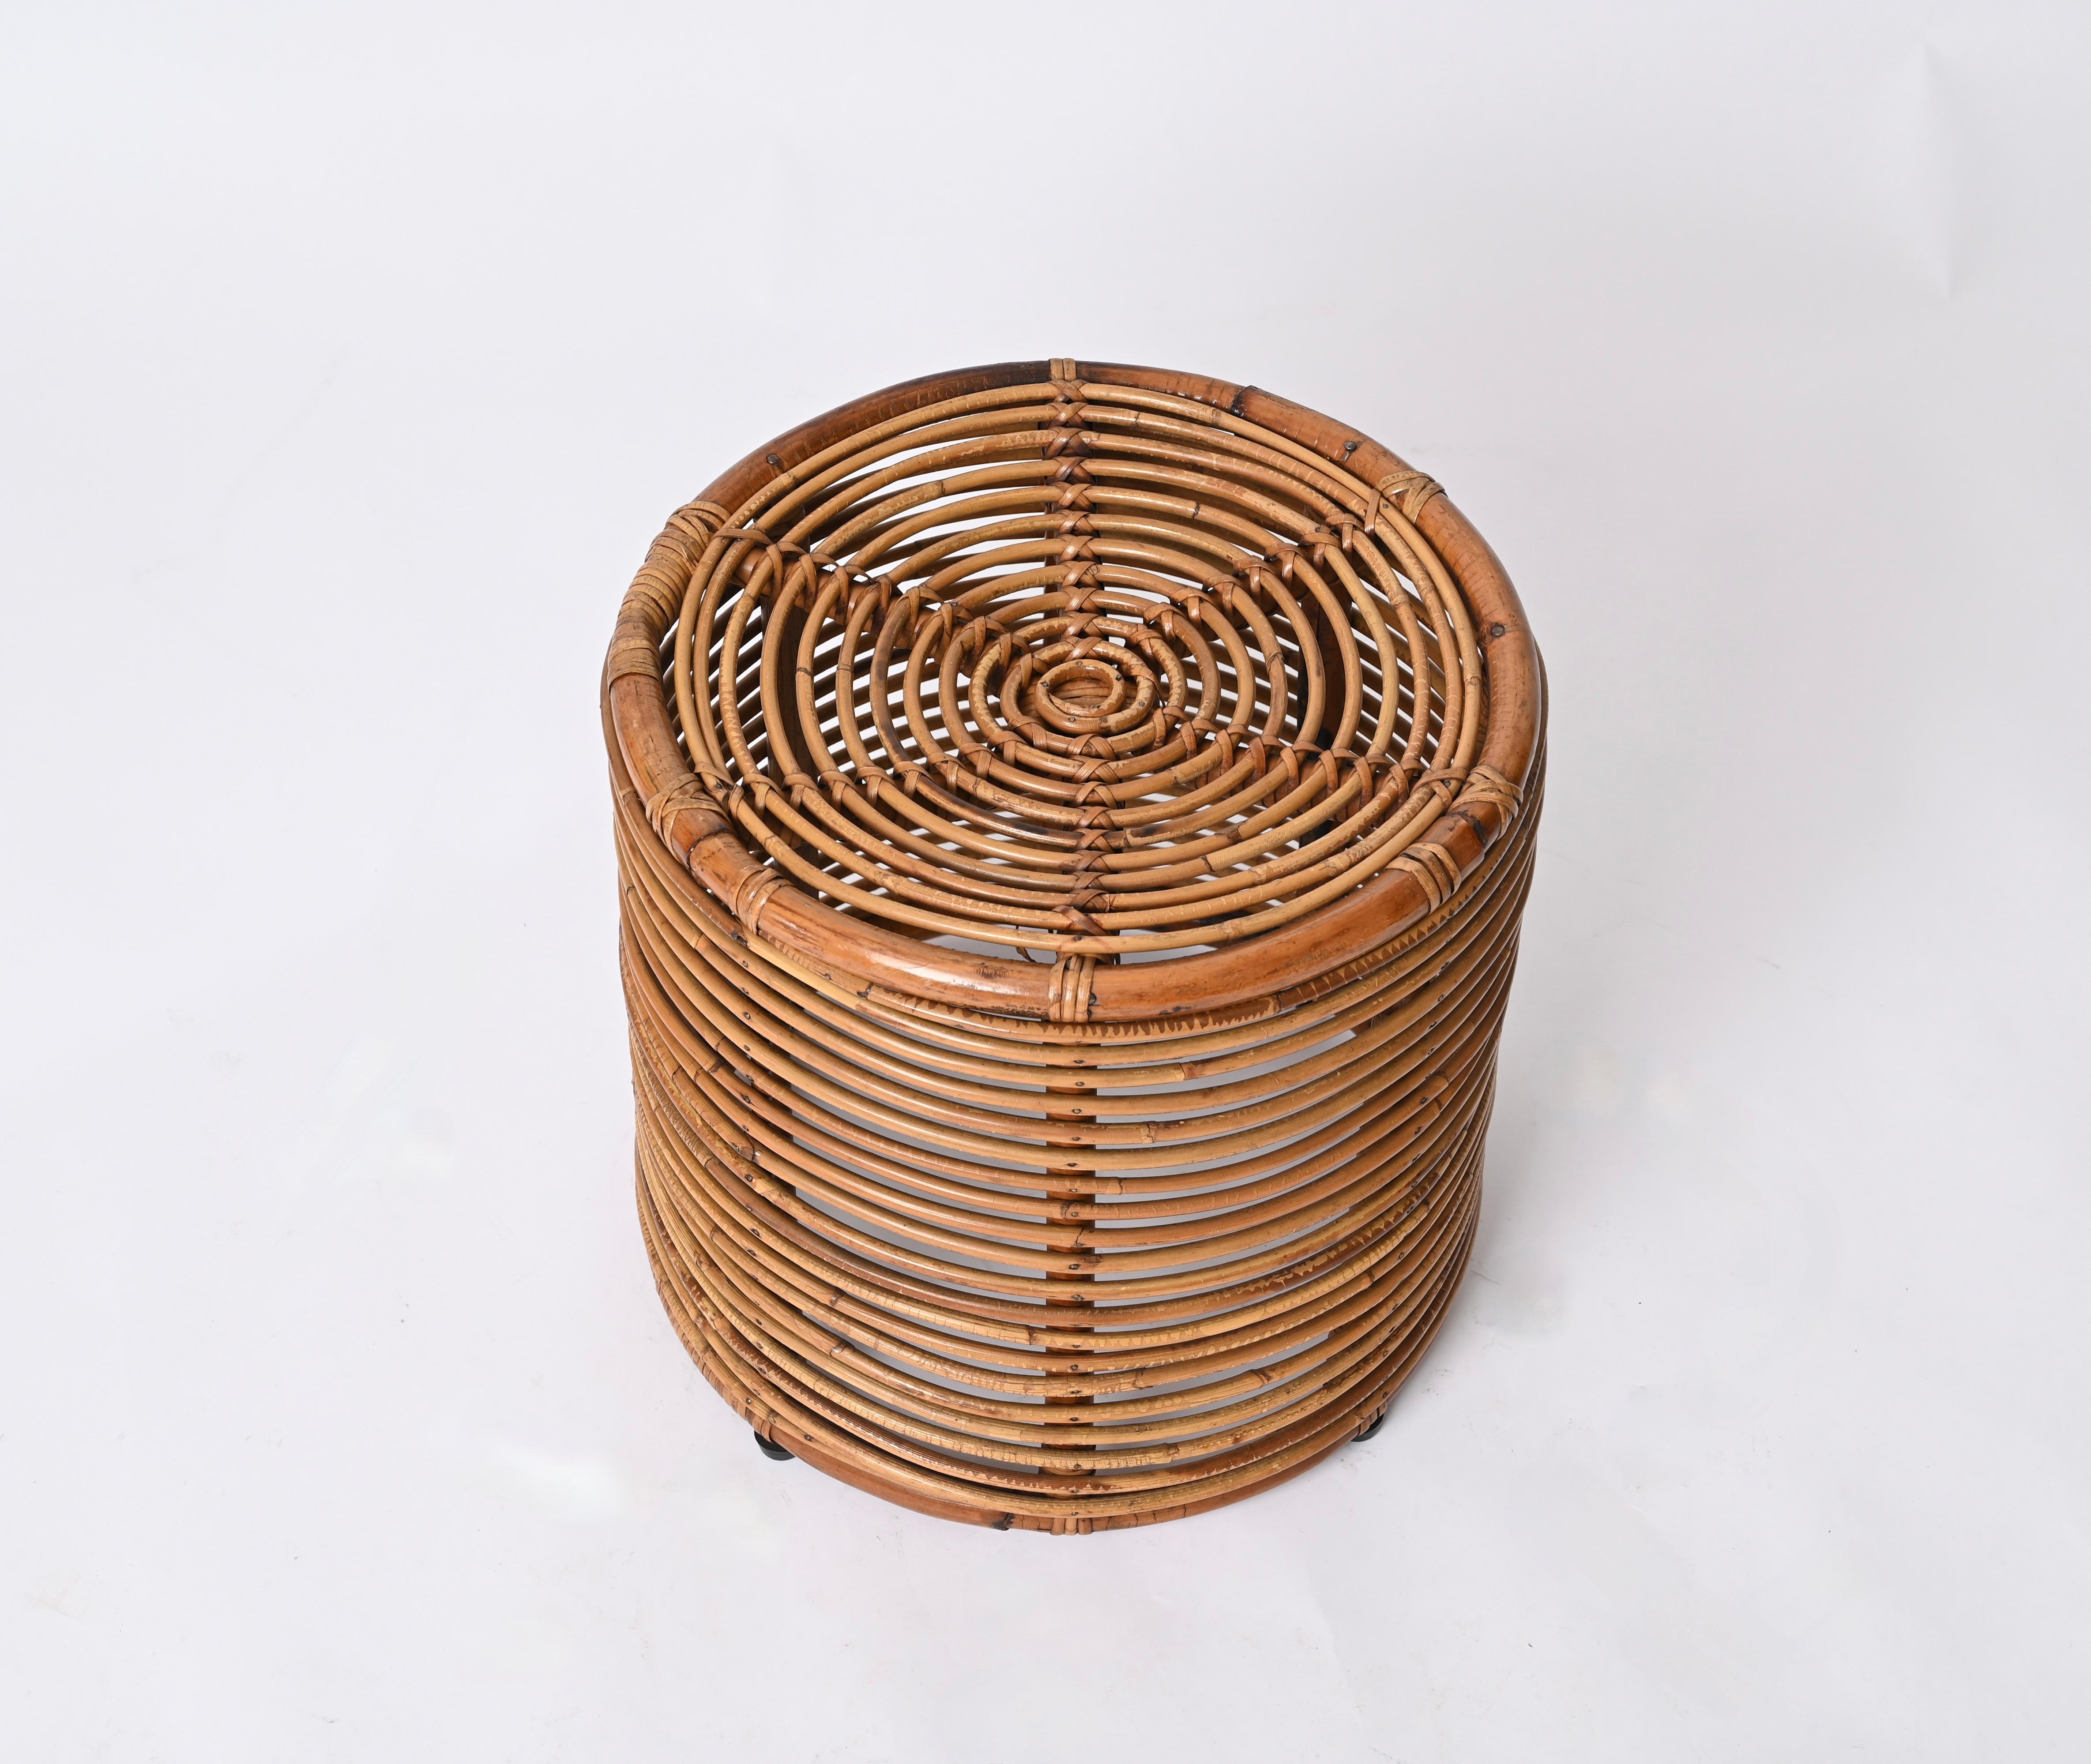 Hand-Crafted Midcentury Tito Agnoli Rattan and Wicker Italian Pouf Stool, Italy, 1970s For Sale